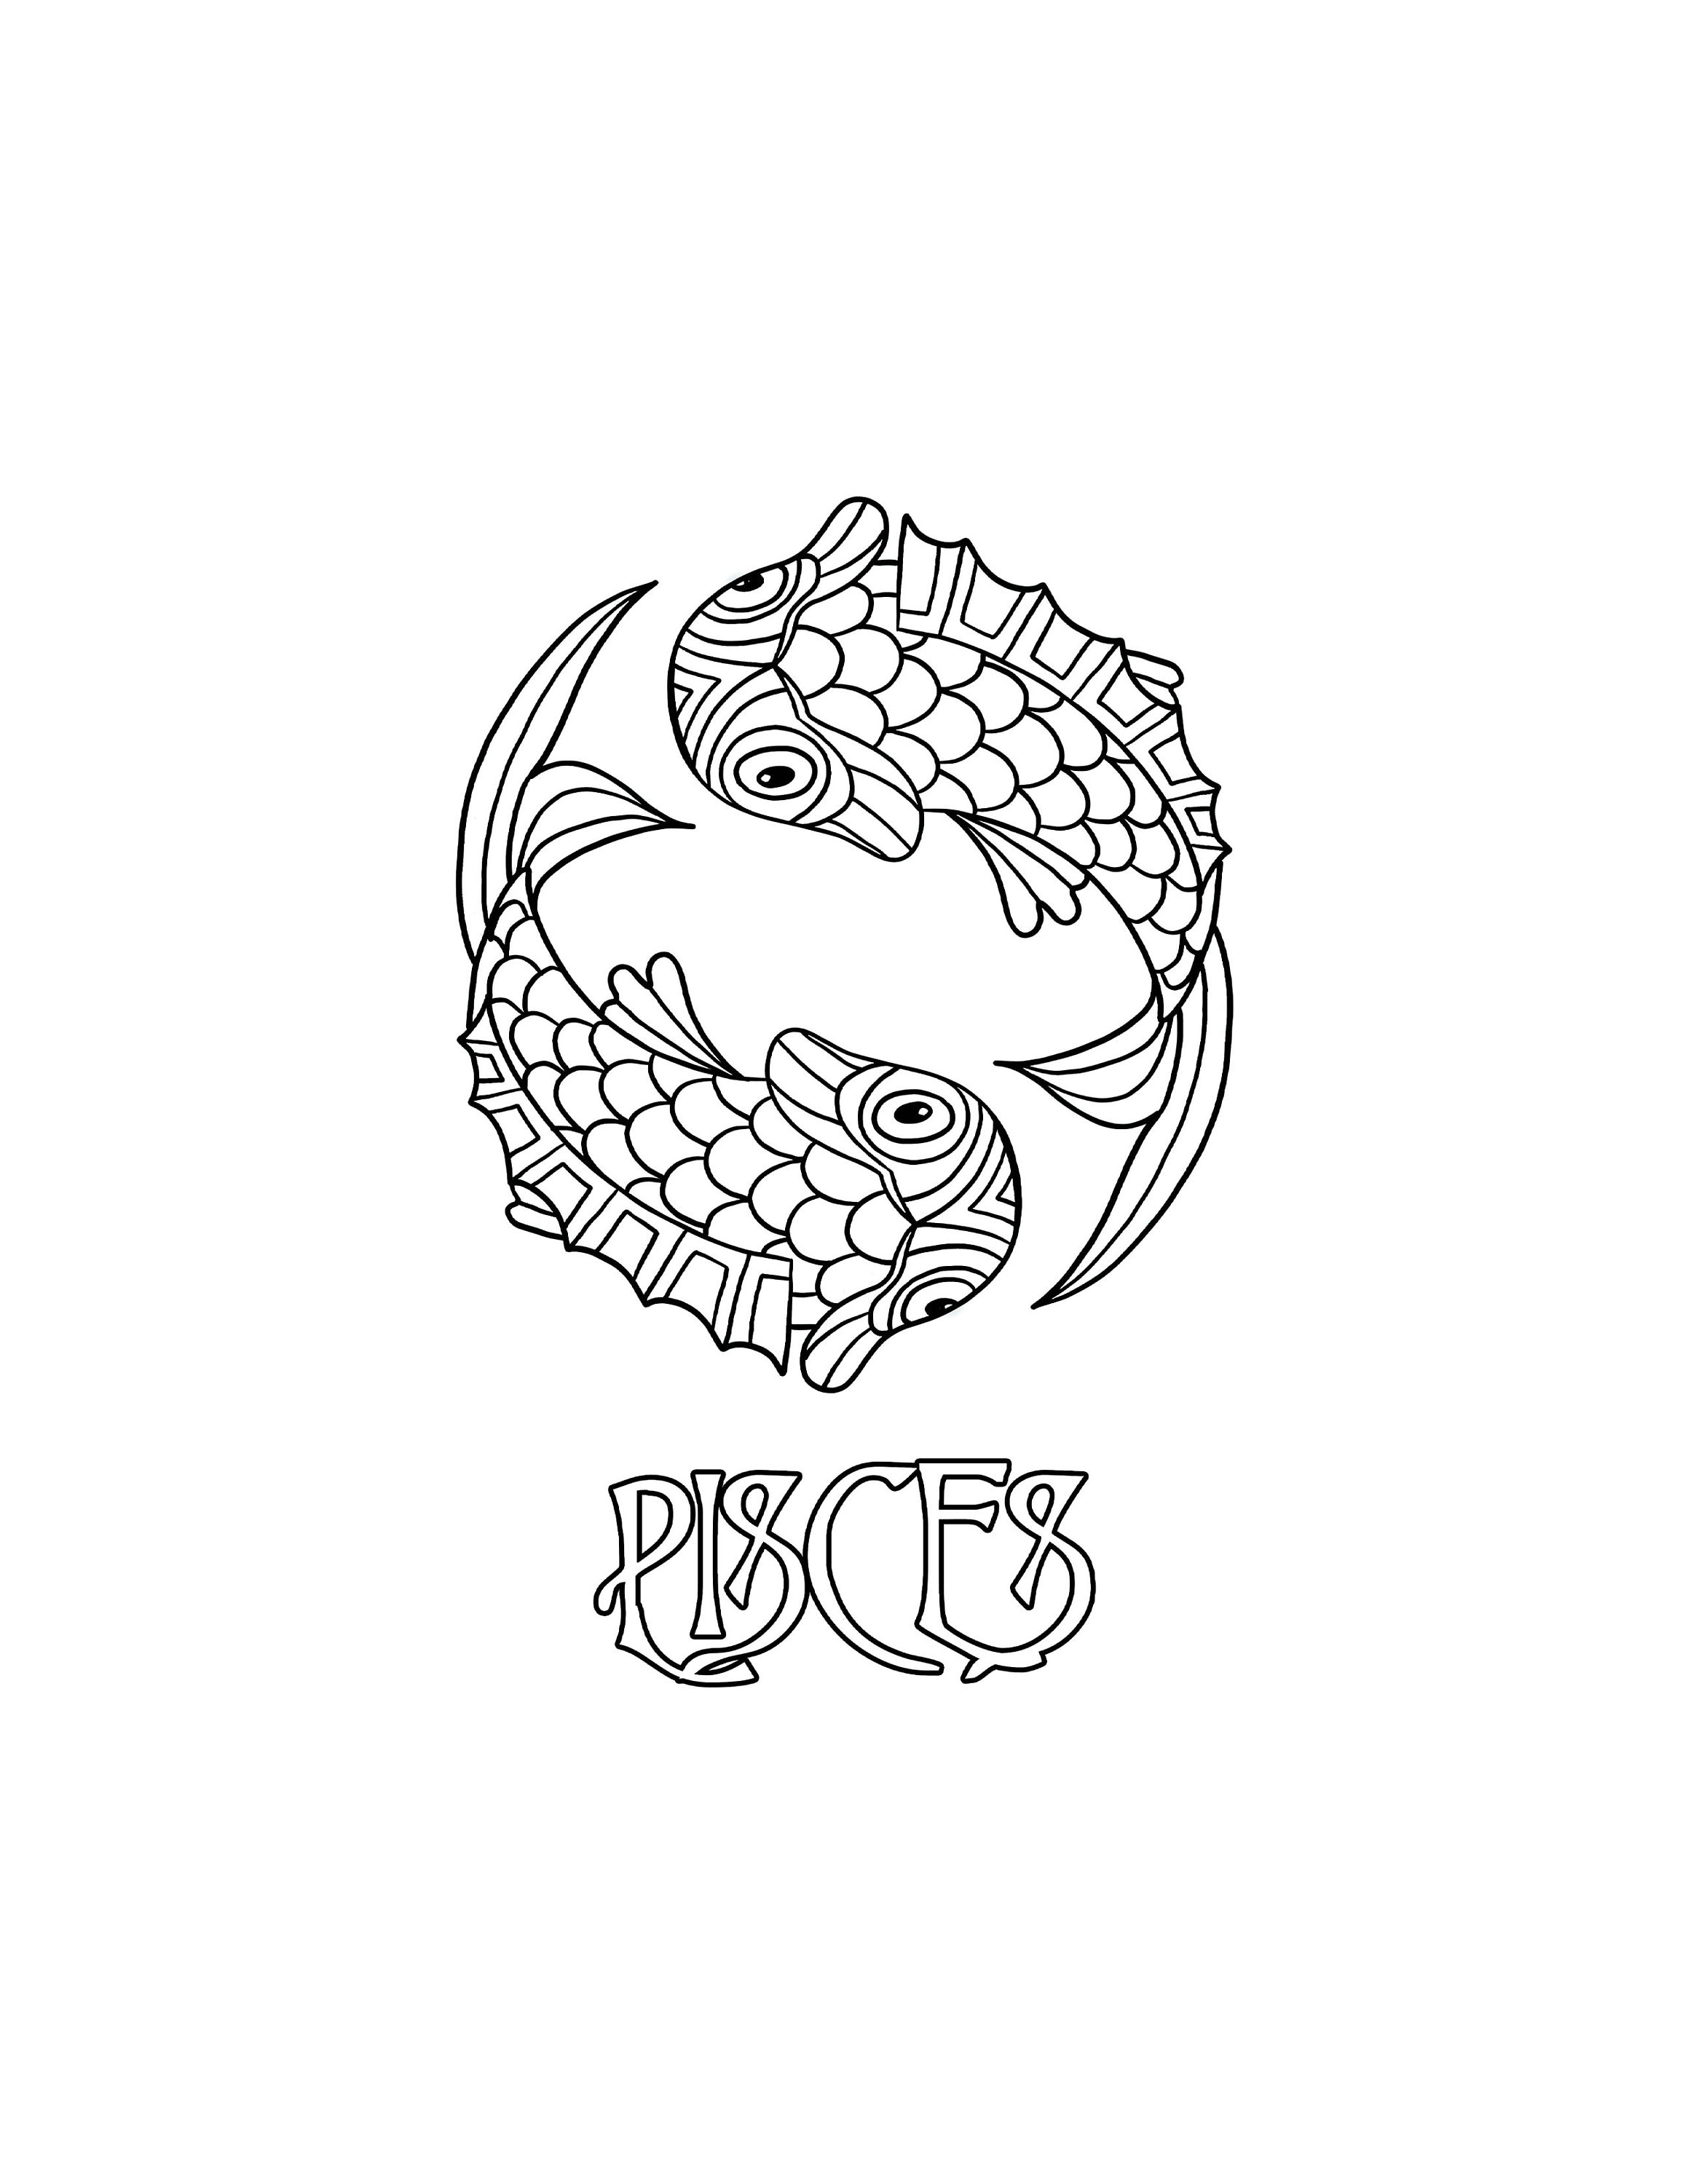 Pisces coloring page digital download printable astrological sign pisces zodiac sign pdf